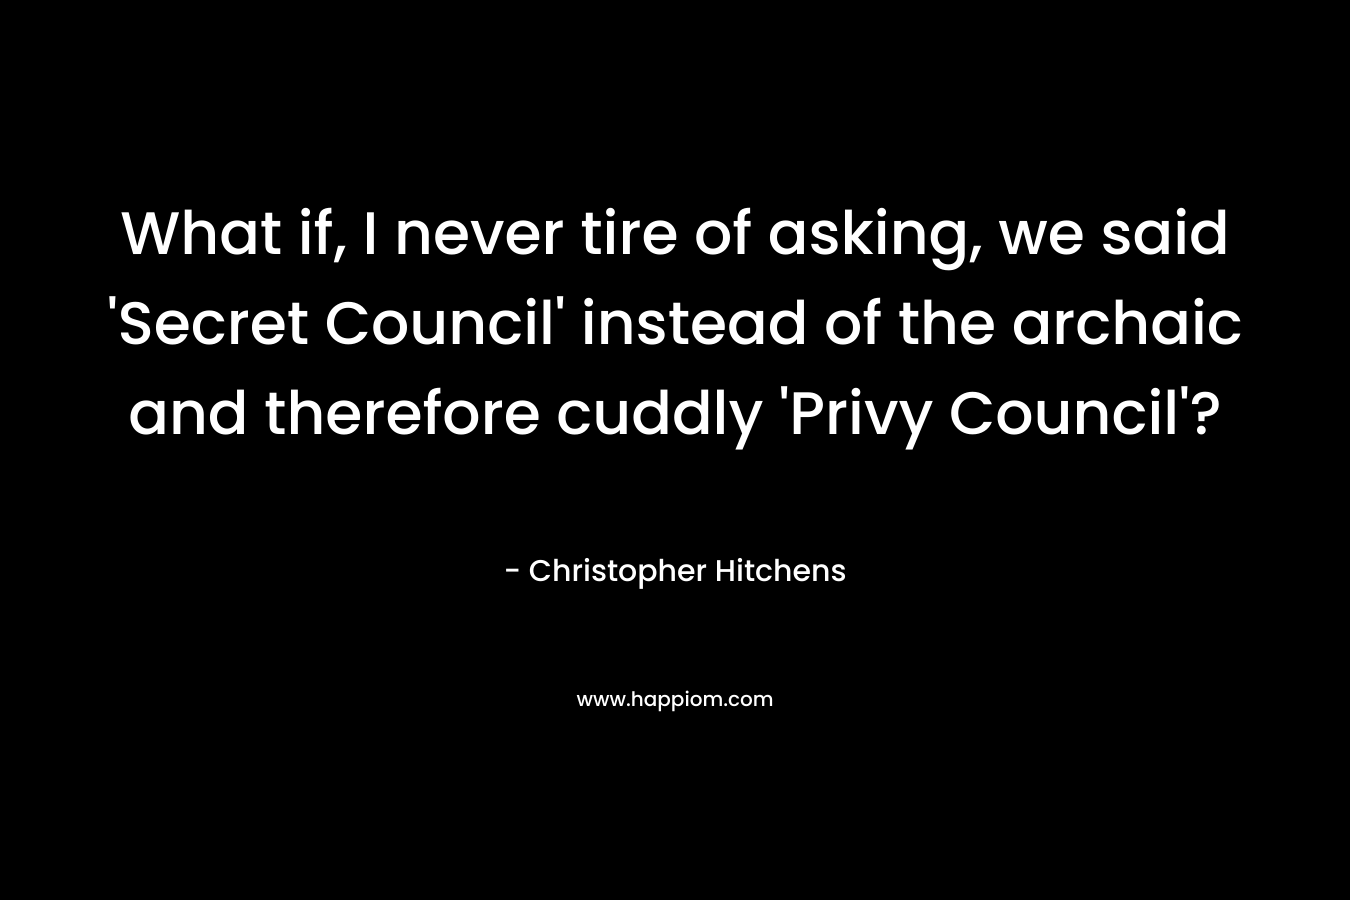 What if, I never tire of asking, we said ‘Secret Council’ instead of the archaic and therefore cuddly ‘Privy Council’? – Christopher Hitchens